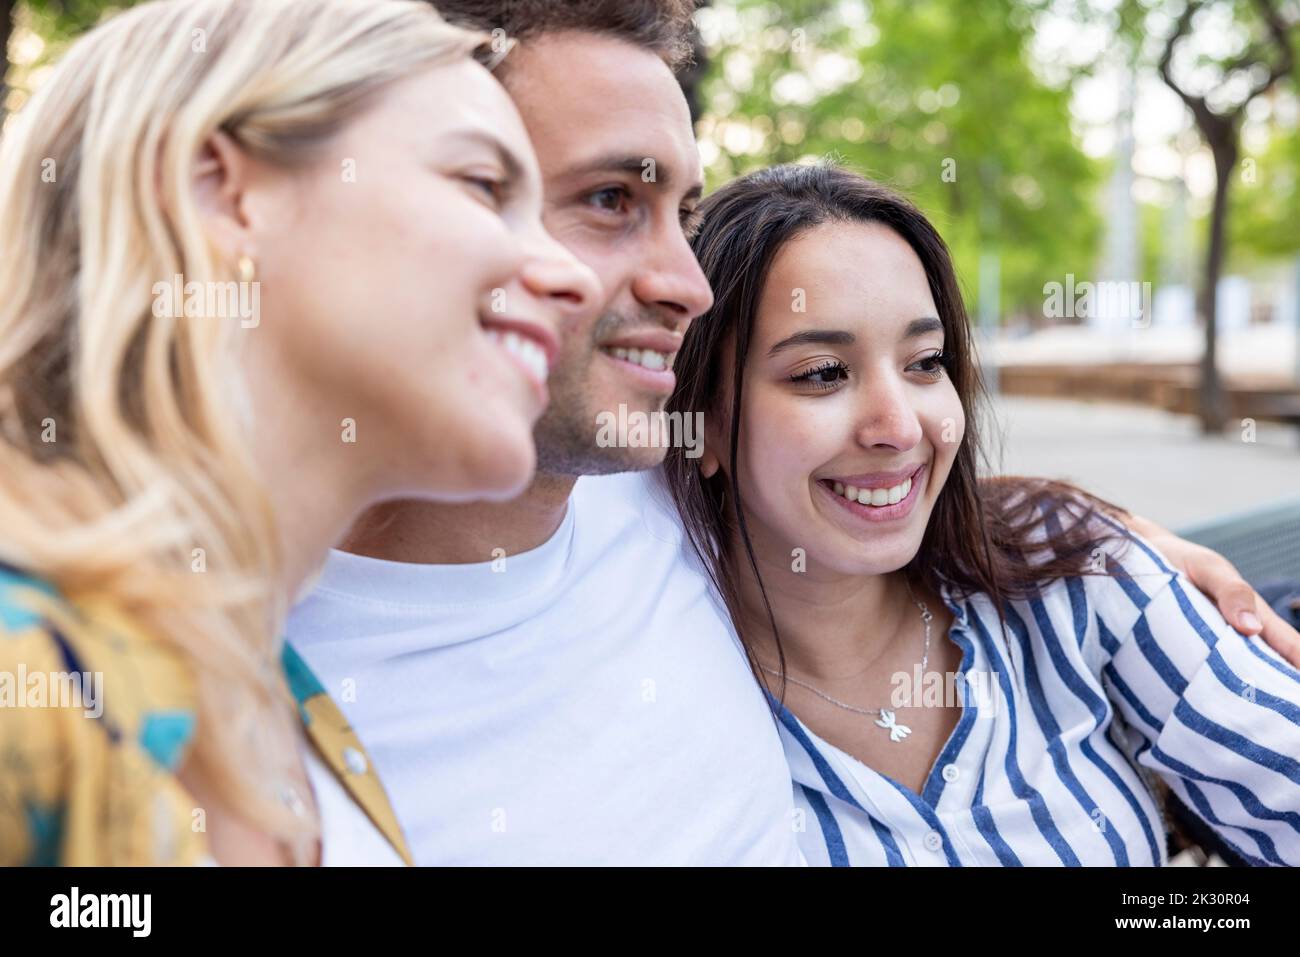 Happy young women with man at park Stock Photo